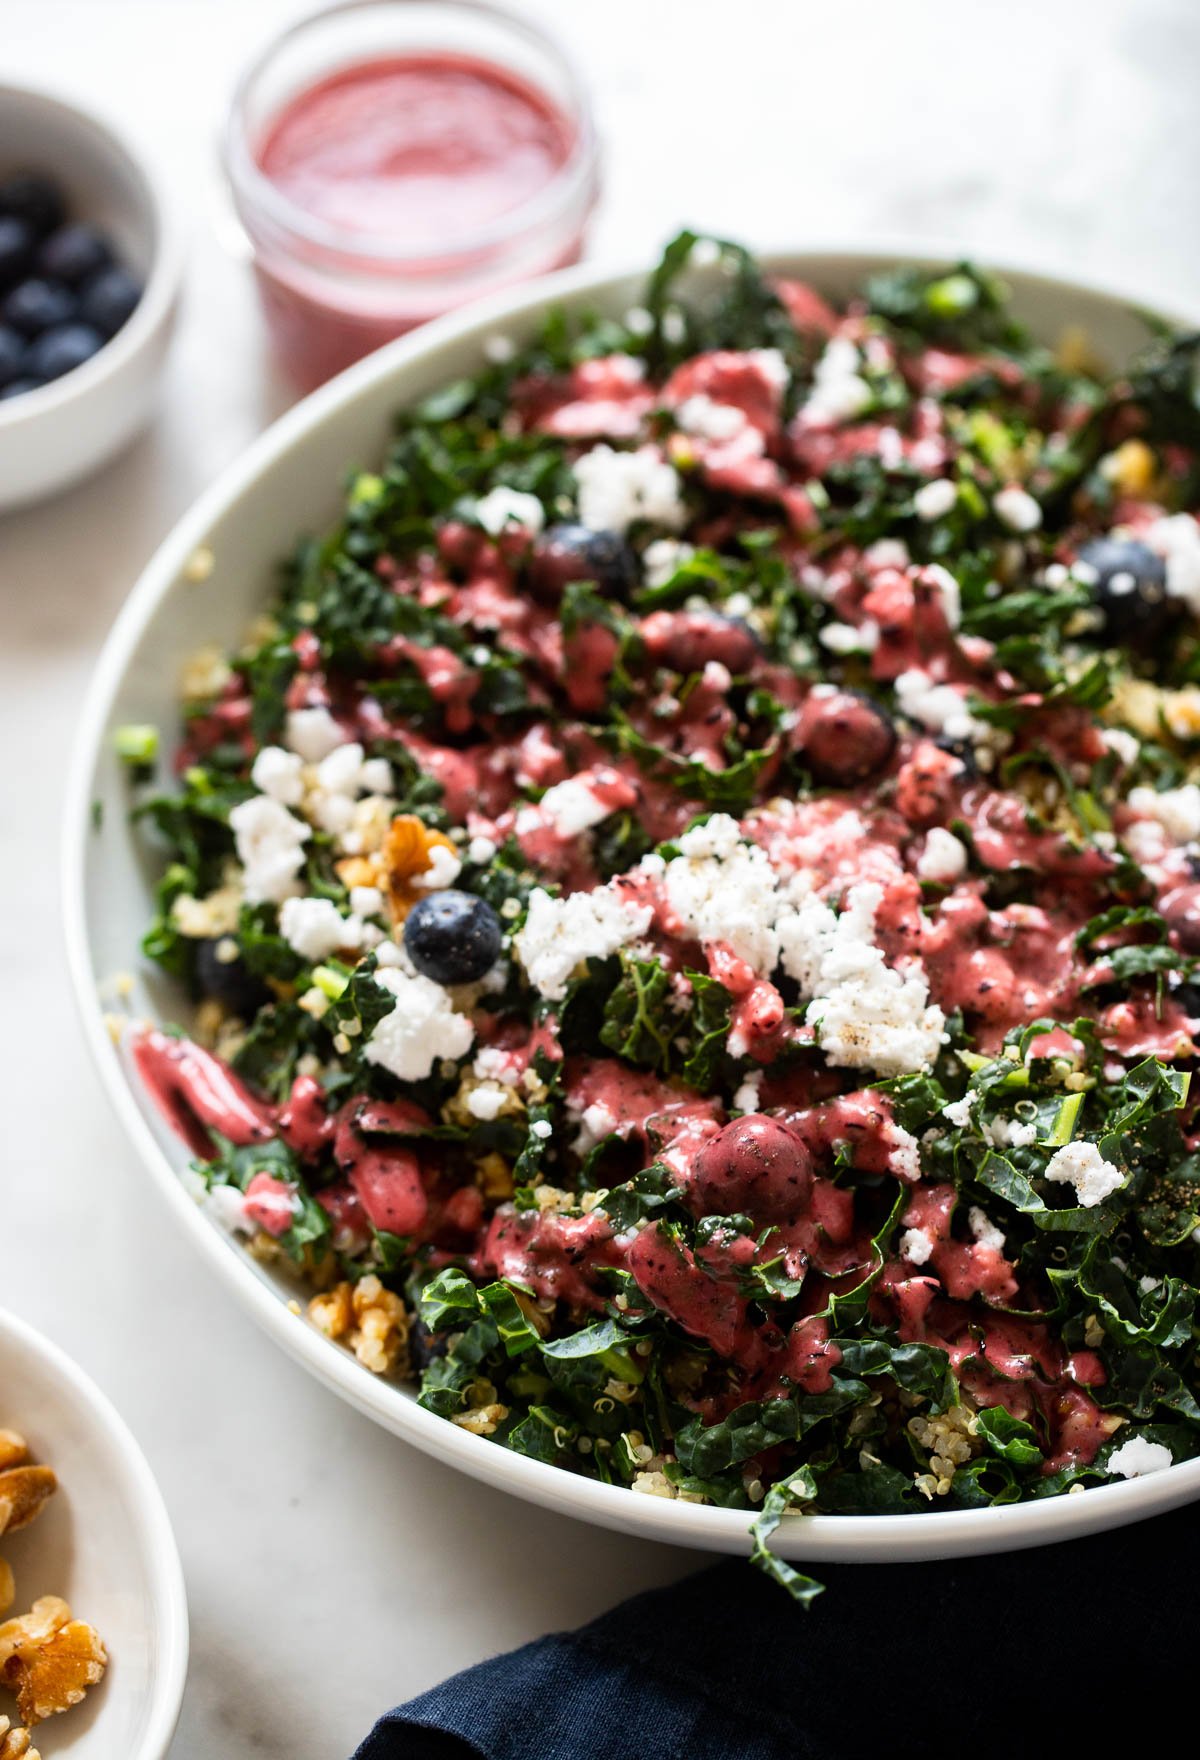 blueberry kale salad with crumbled feta cheese.